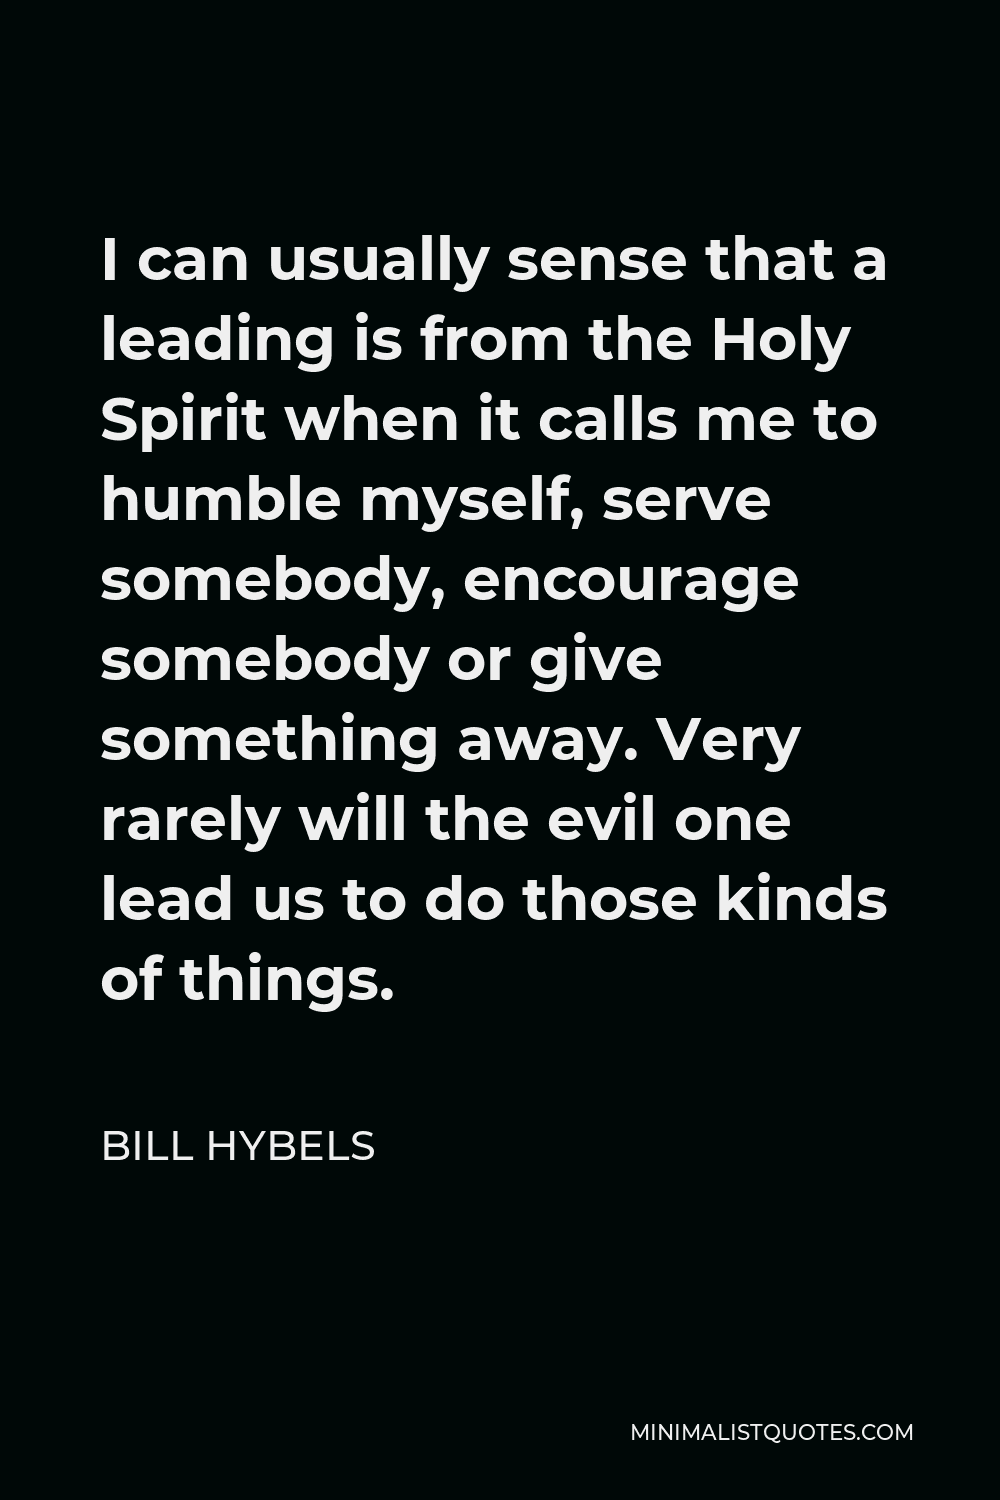 Bill Hybels Quote - I can usually sense that a leading is from the Holy Spirit when it calls me to humble myself, serve somebody, encourage somebody or give something away. Very rarely will the evil one lead us to do those kinds of things.